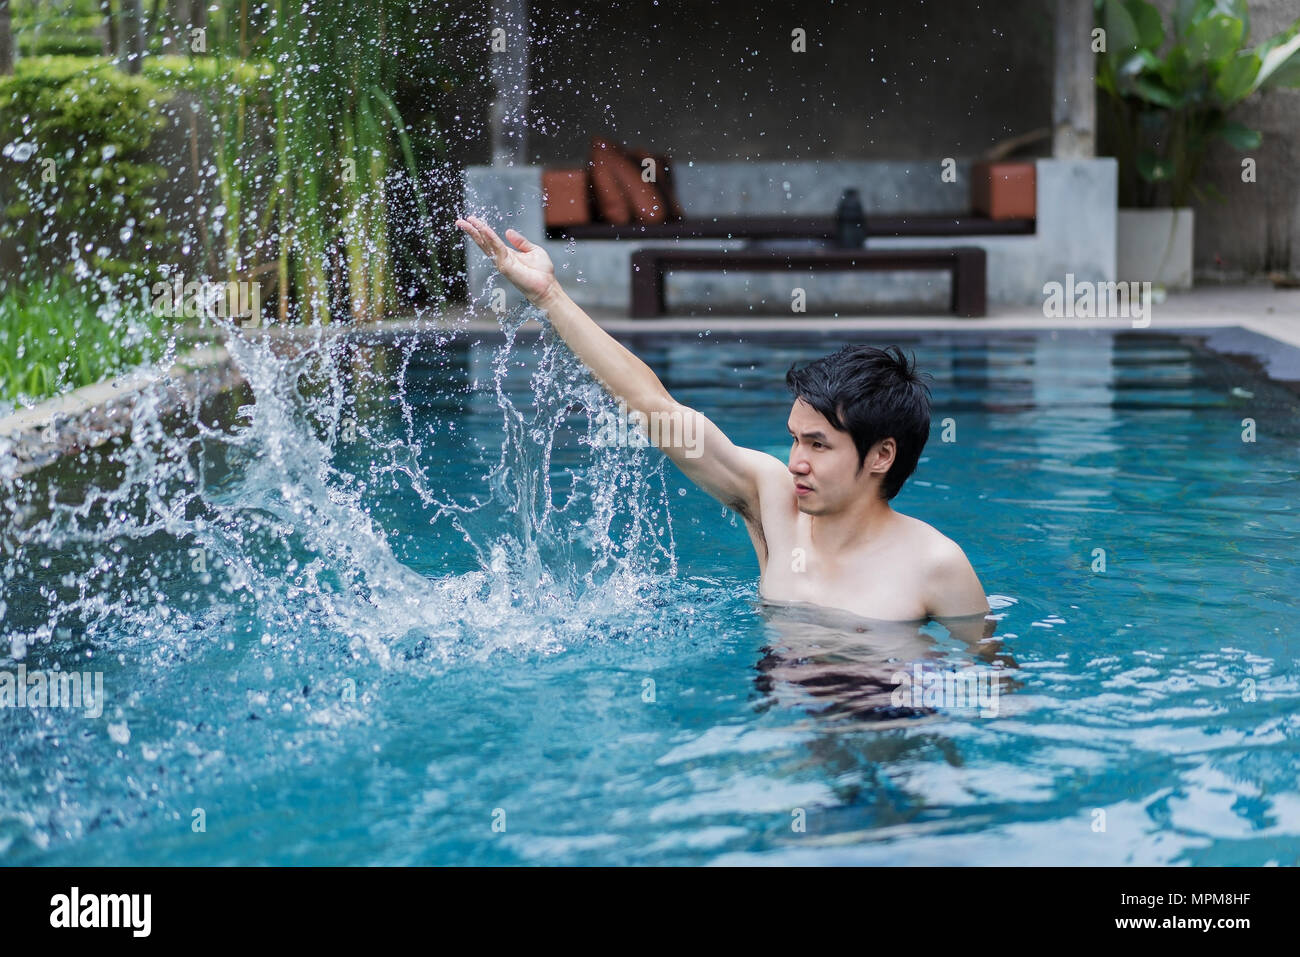 young man in swimming pool and playing water splash Stock Photo